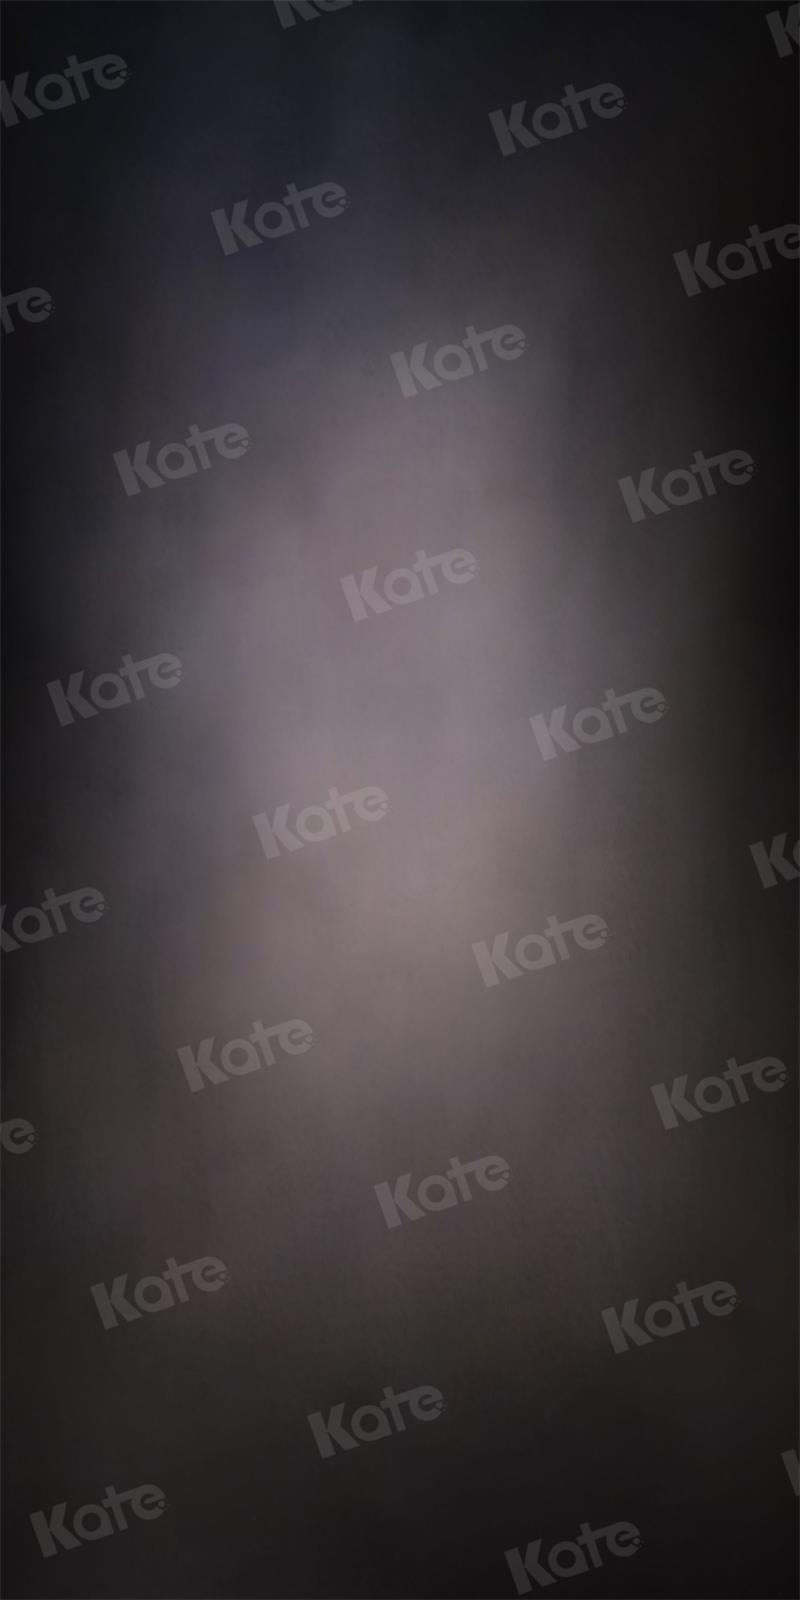 Kate Abstract Black Grey Backdrop for Photography